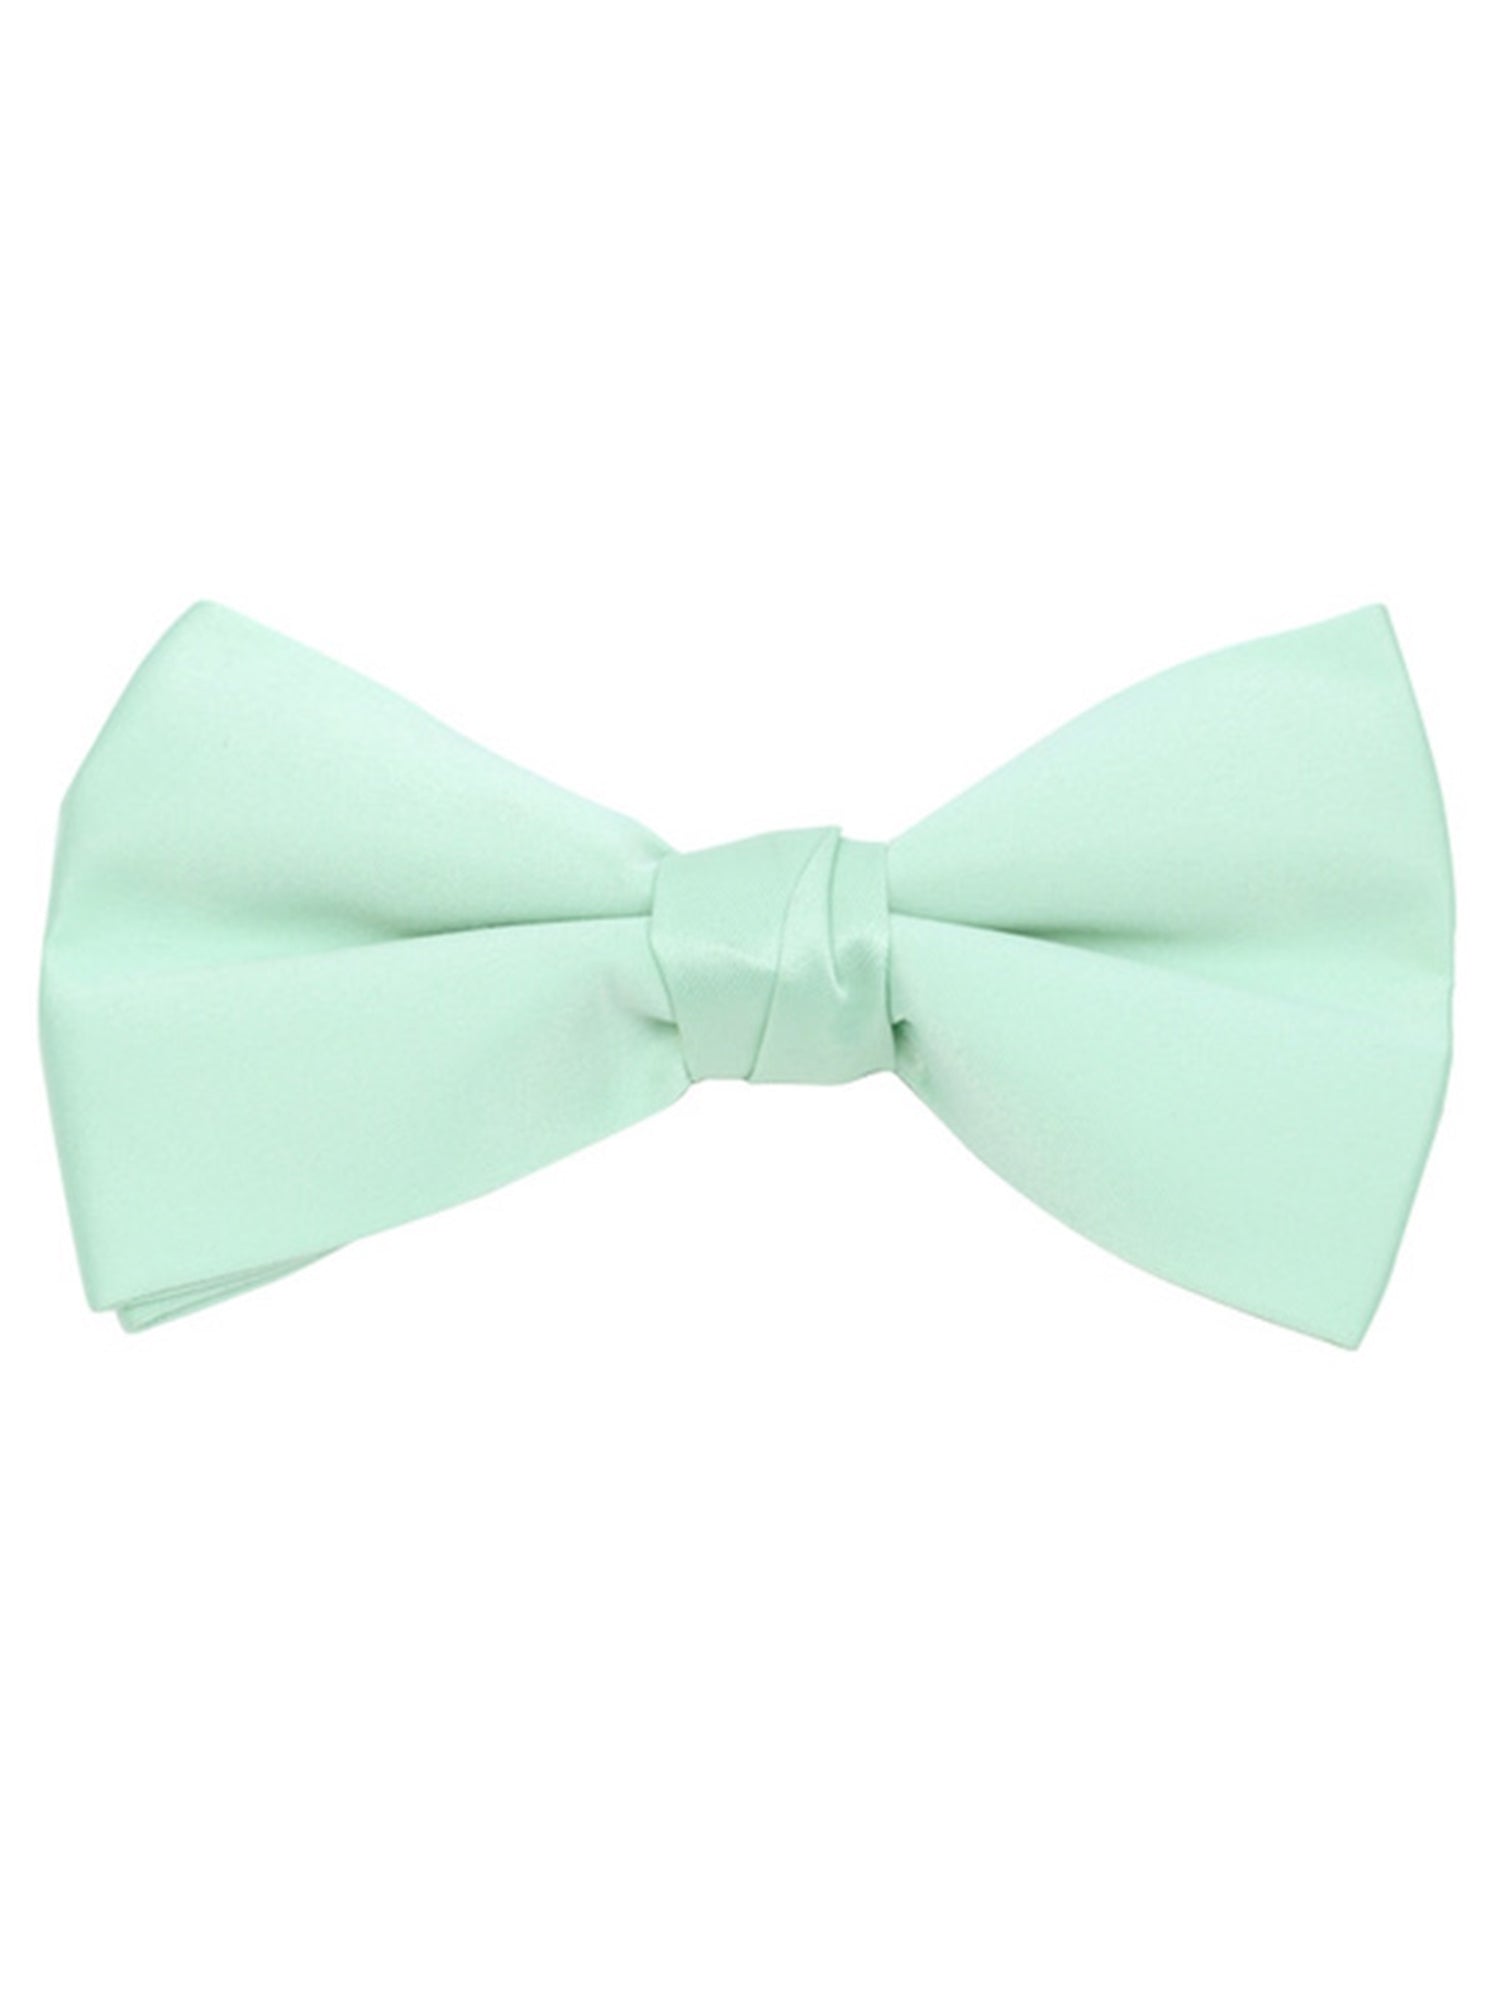 Men's Pre-tied Adjustable Length Bow Tie - Formal Tuxedo Solid Color Men's Solid Color Bow Tie TheDapperTie Light Green One Size 